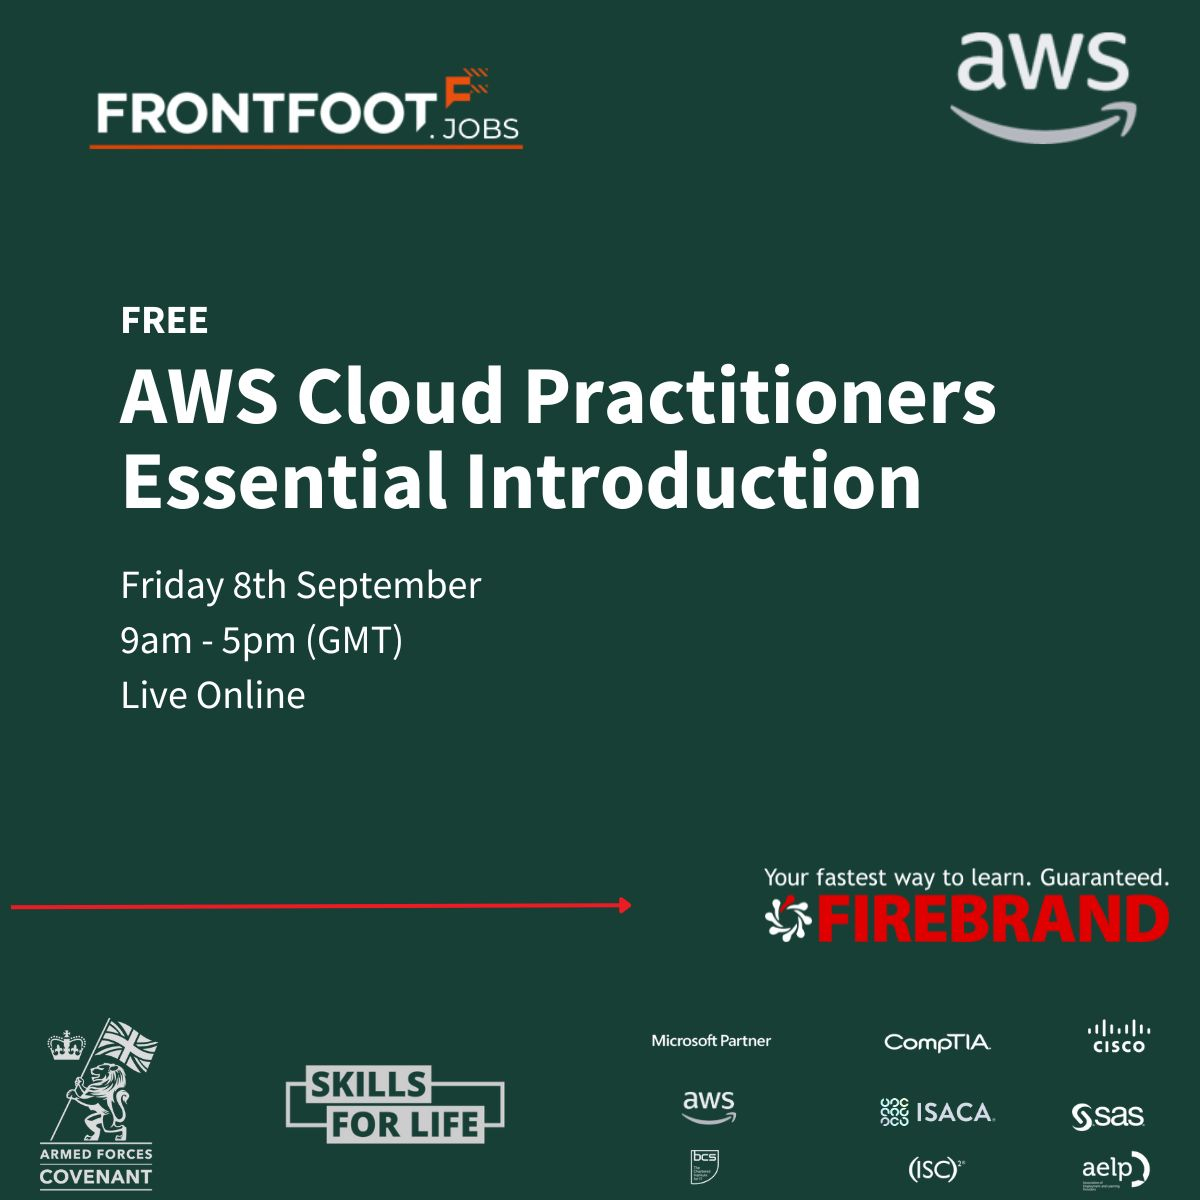 FrontFoot in partnership with Firebrand Training: FREE online AWS Cloud Practitioner Essentials Course on Friday 8th September from 9am – 5pm (GMT) Sign up: dlvr.it/Svf64k #BeAFirebrand #AWSCloudPractitioner #AWSFreeCourse #LearnAndGrow #FutureForward #Frontfootjobs